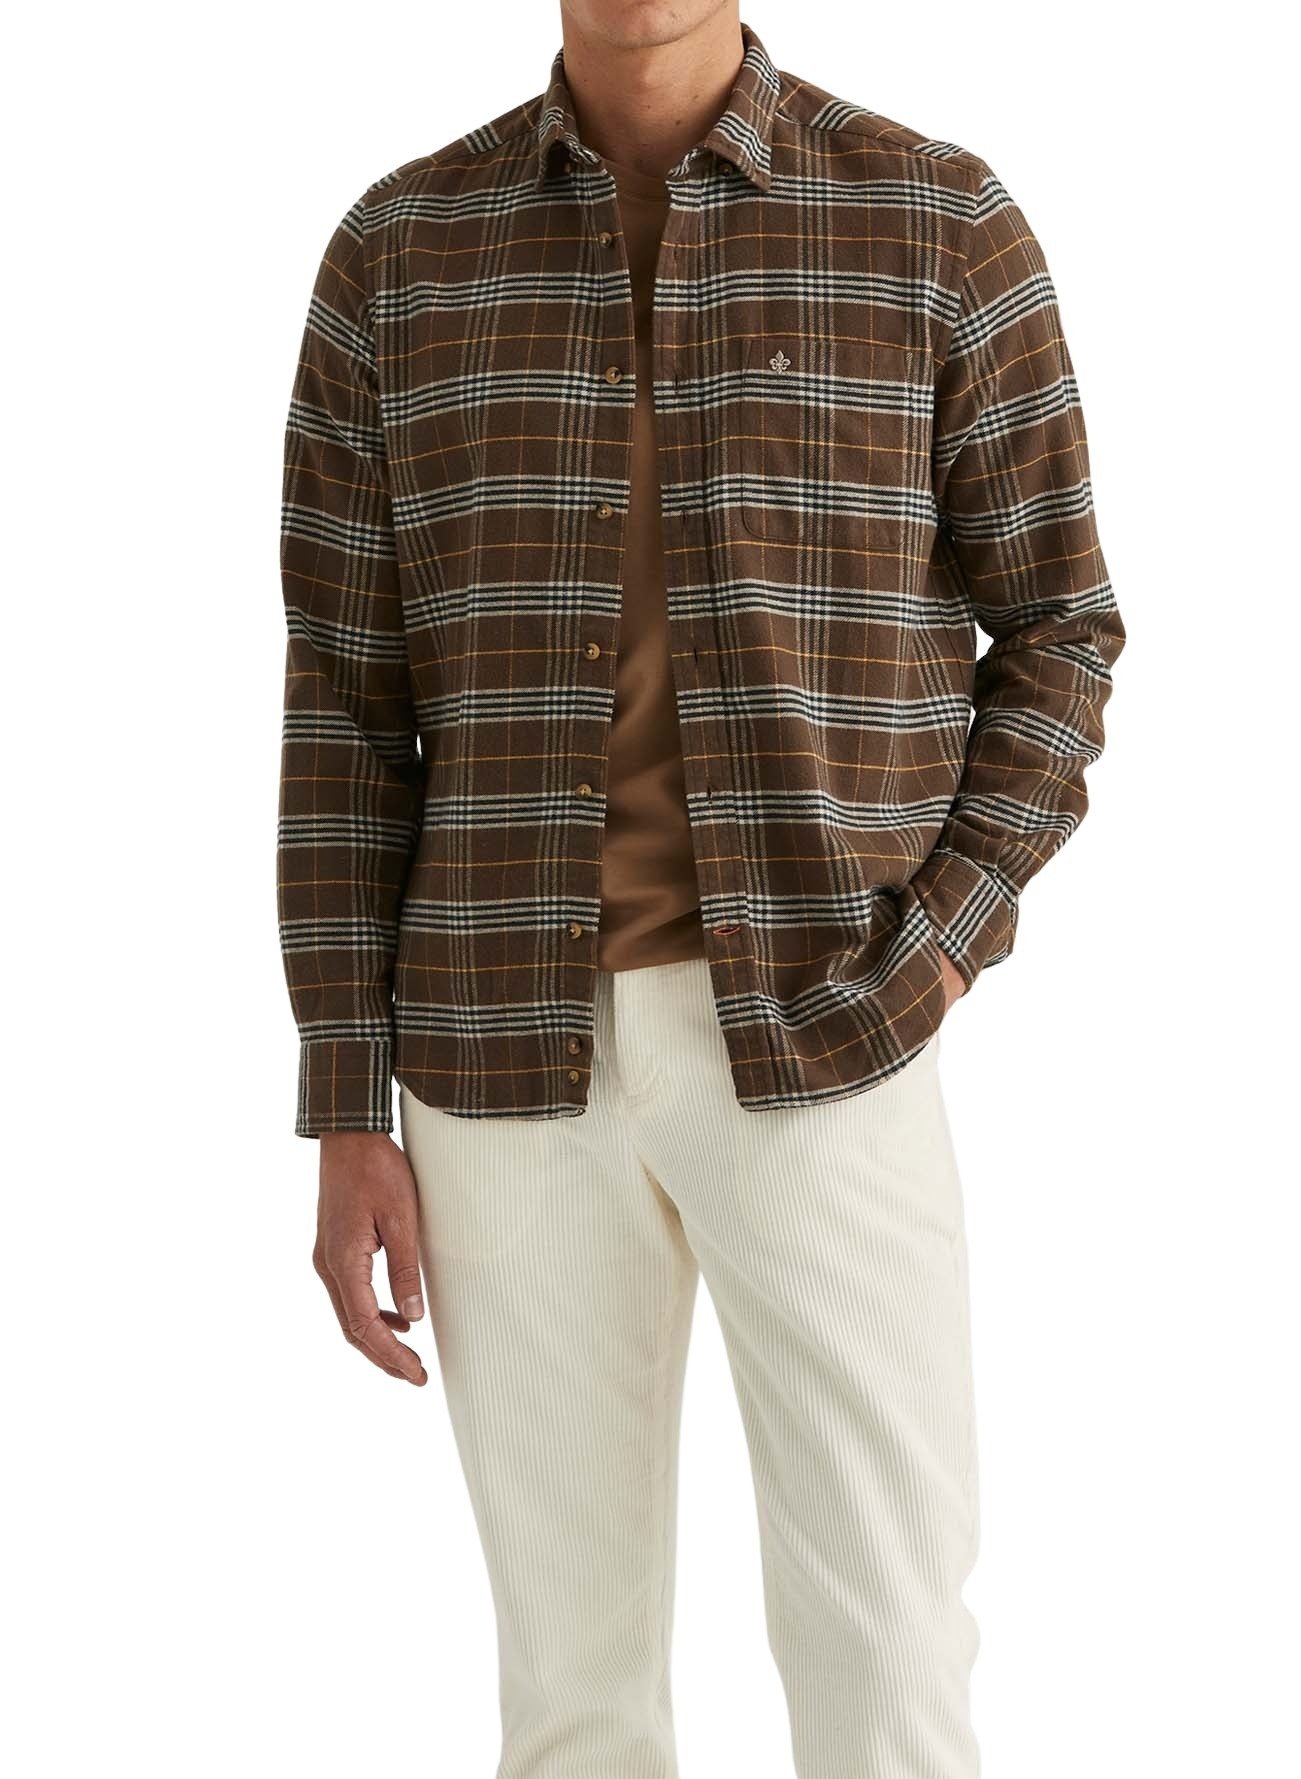 801640-flannel-big-check-shirt-classic-fit-80-brown-1